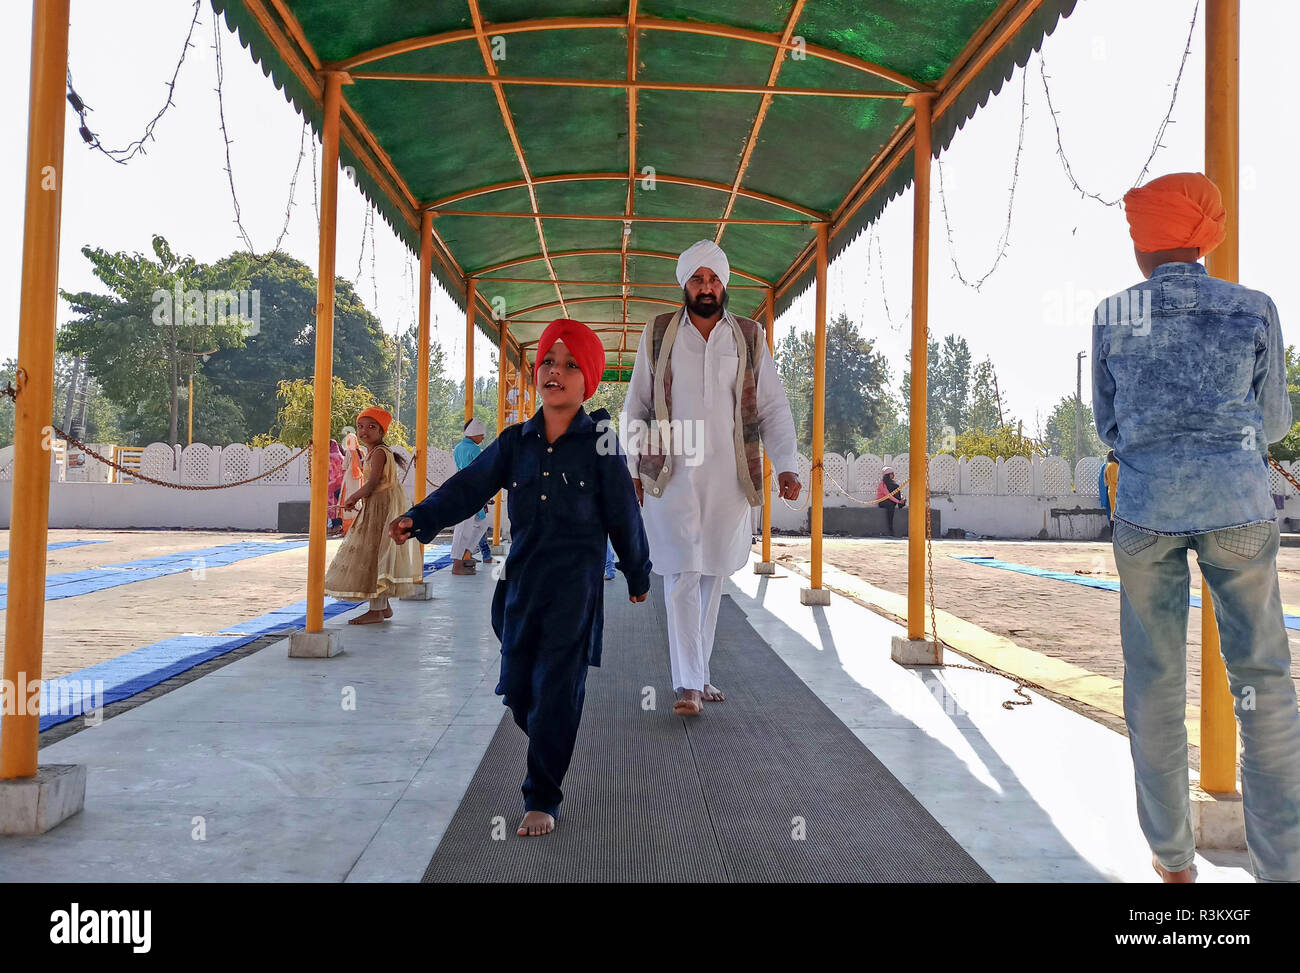 Devotees are seen paying obeisance at the Khanpur Gurduwara during the occasion of the 550th birth anniversary of Guru Nanak Dev in Mohali. Sikhism was founded in the 15th century by Guru Nanak, who broke away from Hinduism, India’s dominant religion, He preached the equality of races and genders and the rejection of image-worship and the caste system. Stock Photo